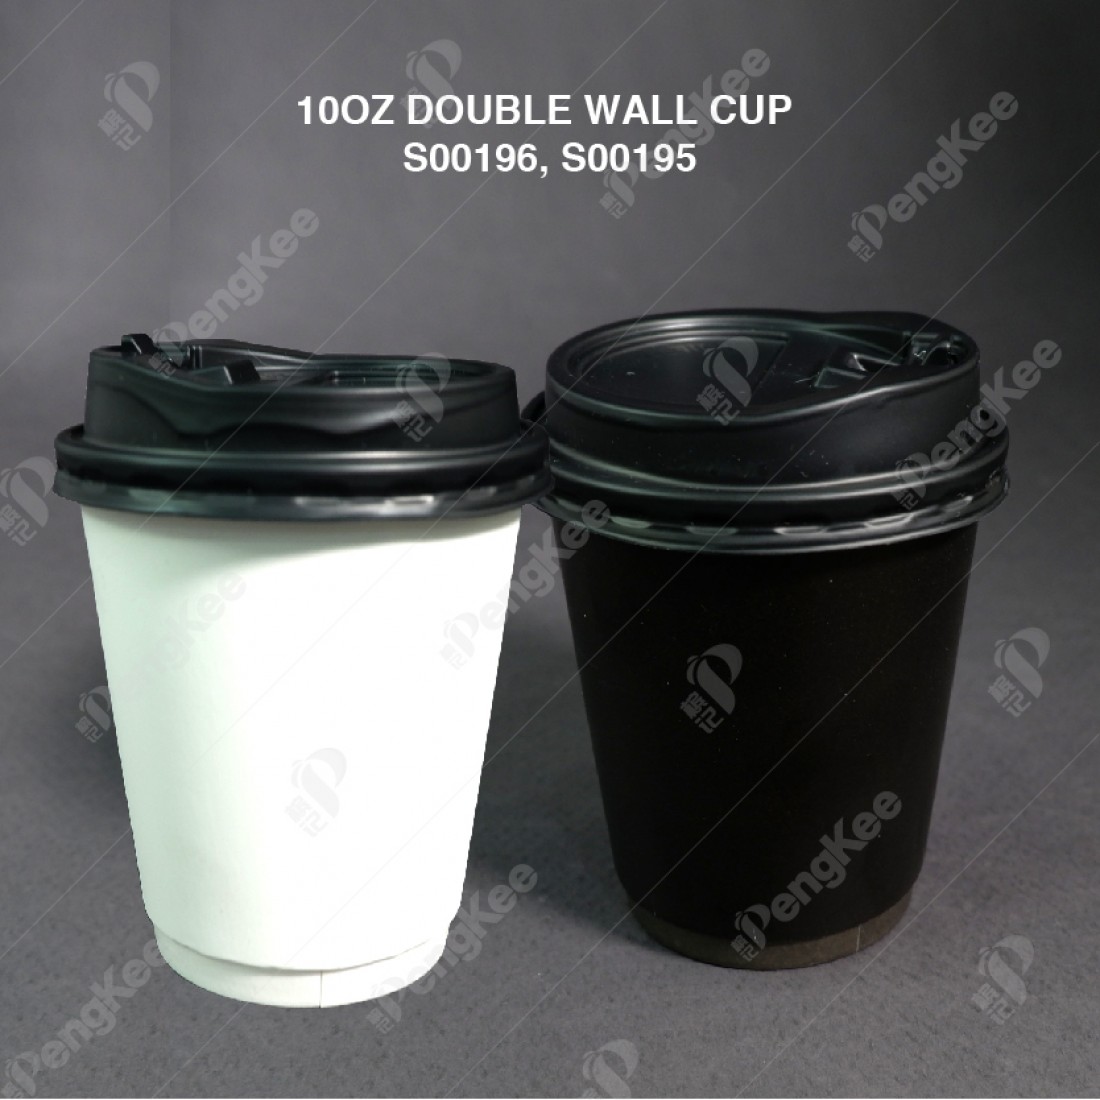 10OZ DOUBLE WALL CUP